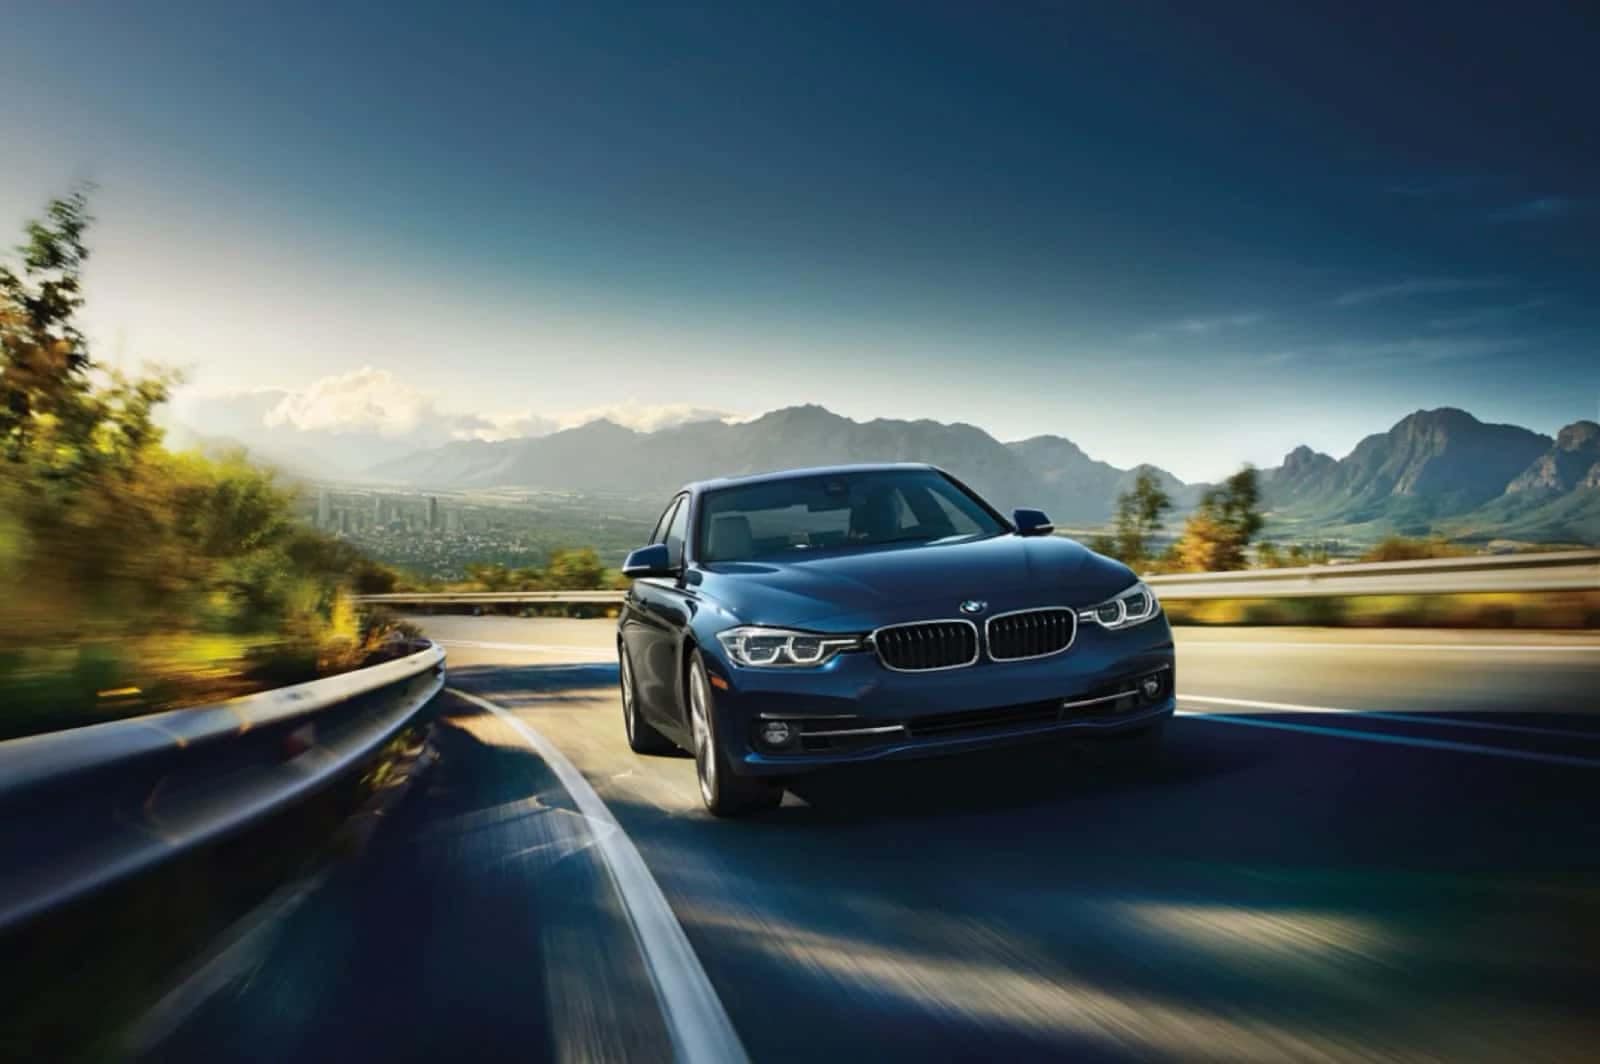 BMW 3 Series driving with mountainous background